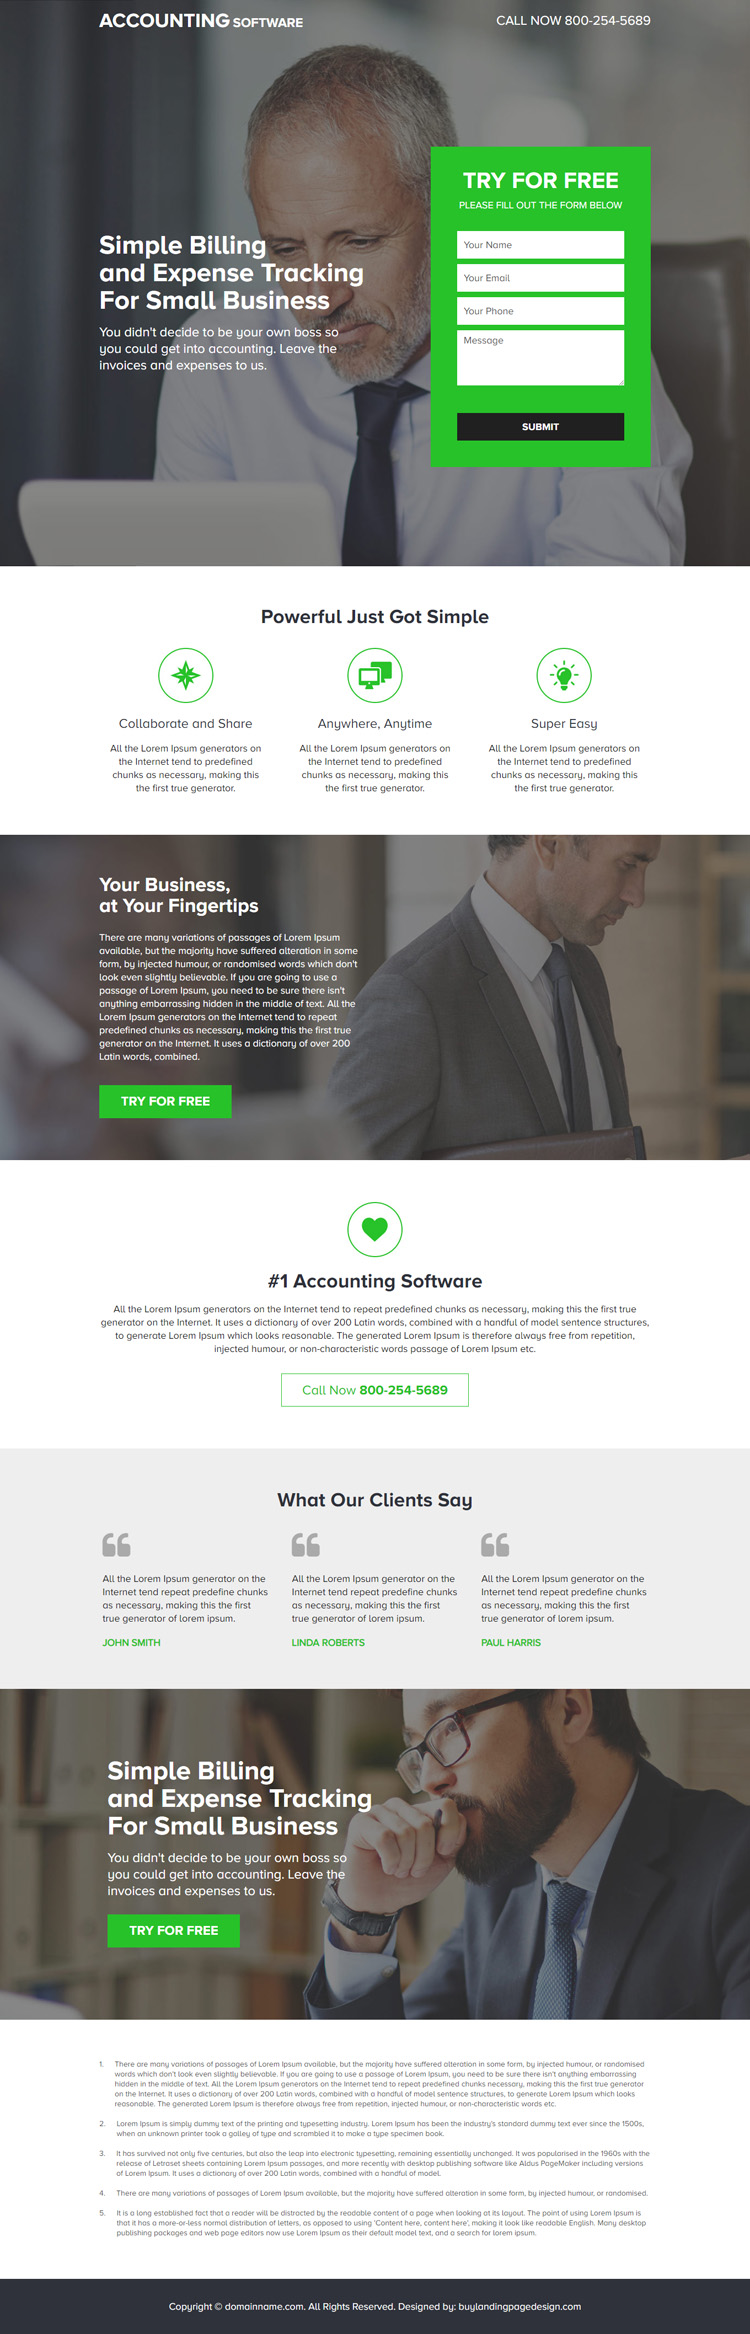 software download free trial responsive landing page design